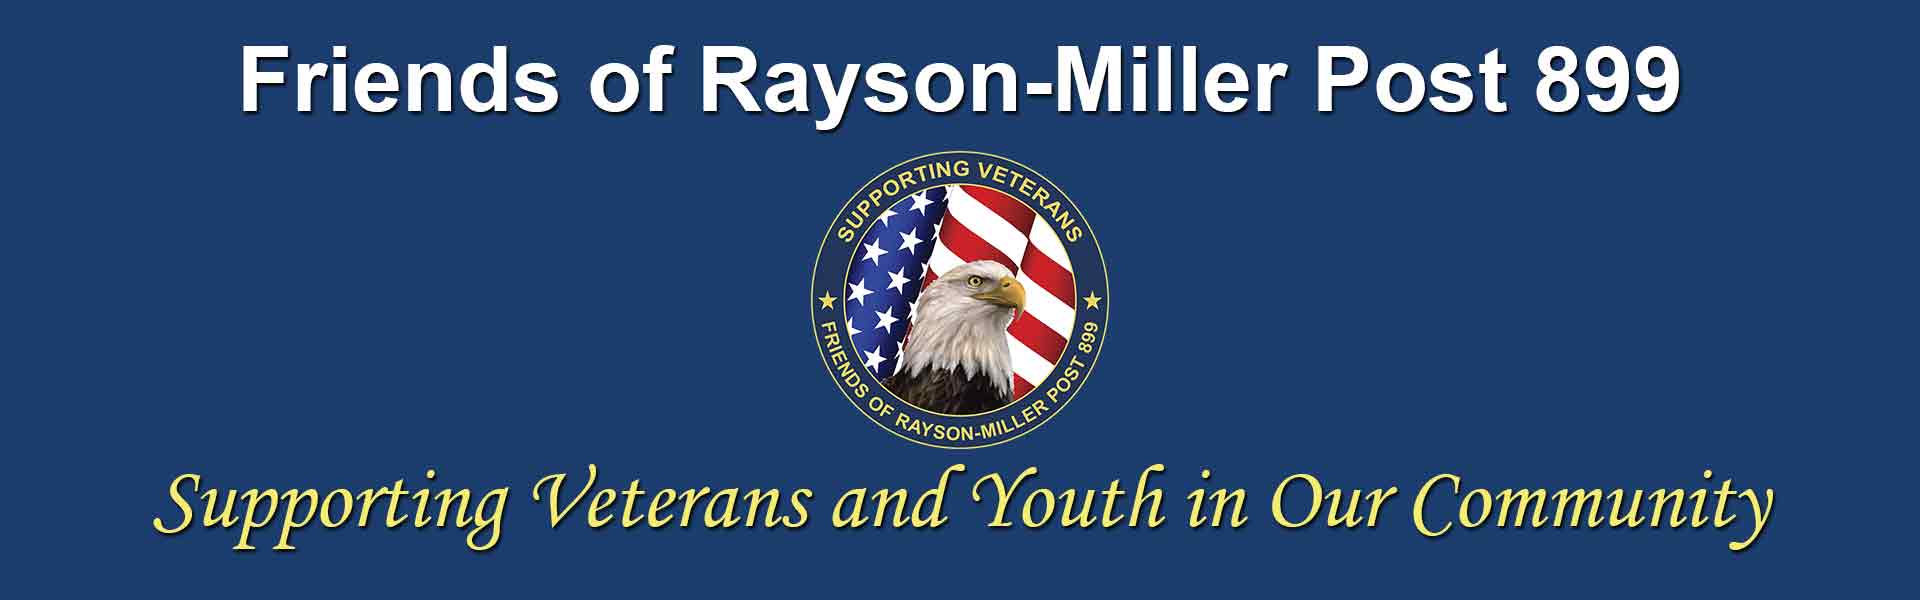 Friends of Rayson-Miller Post 899